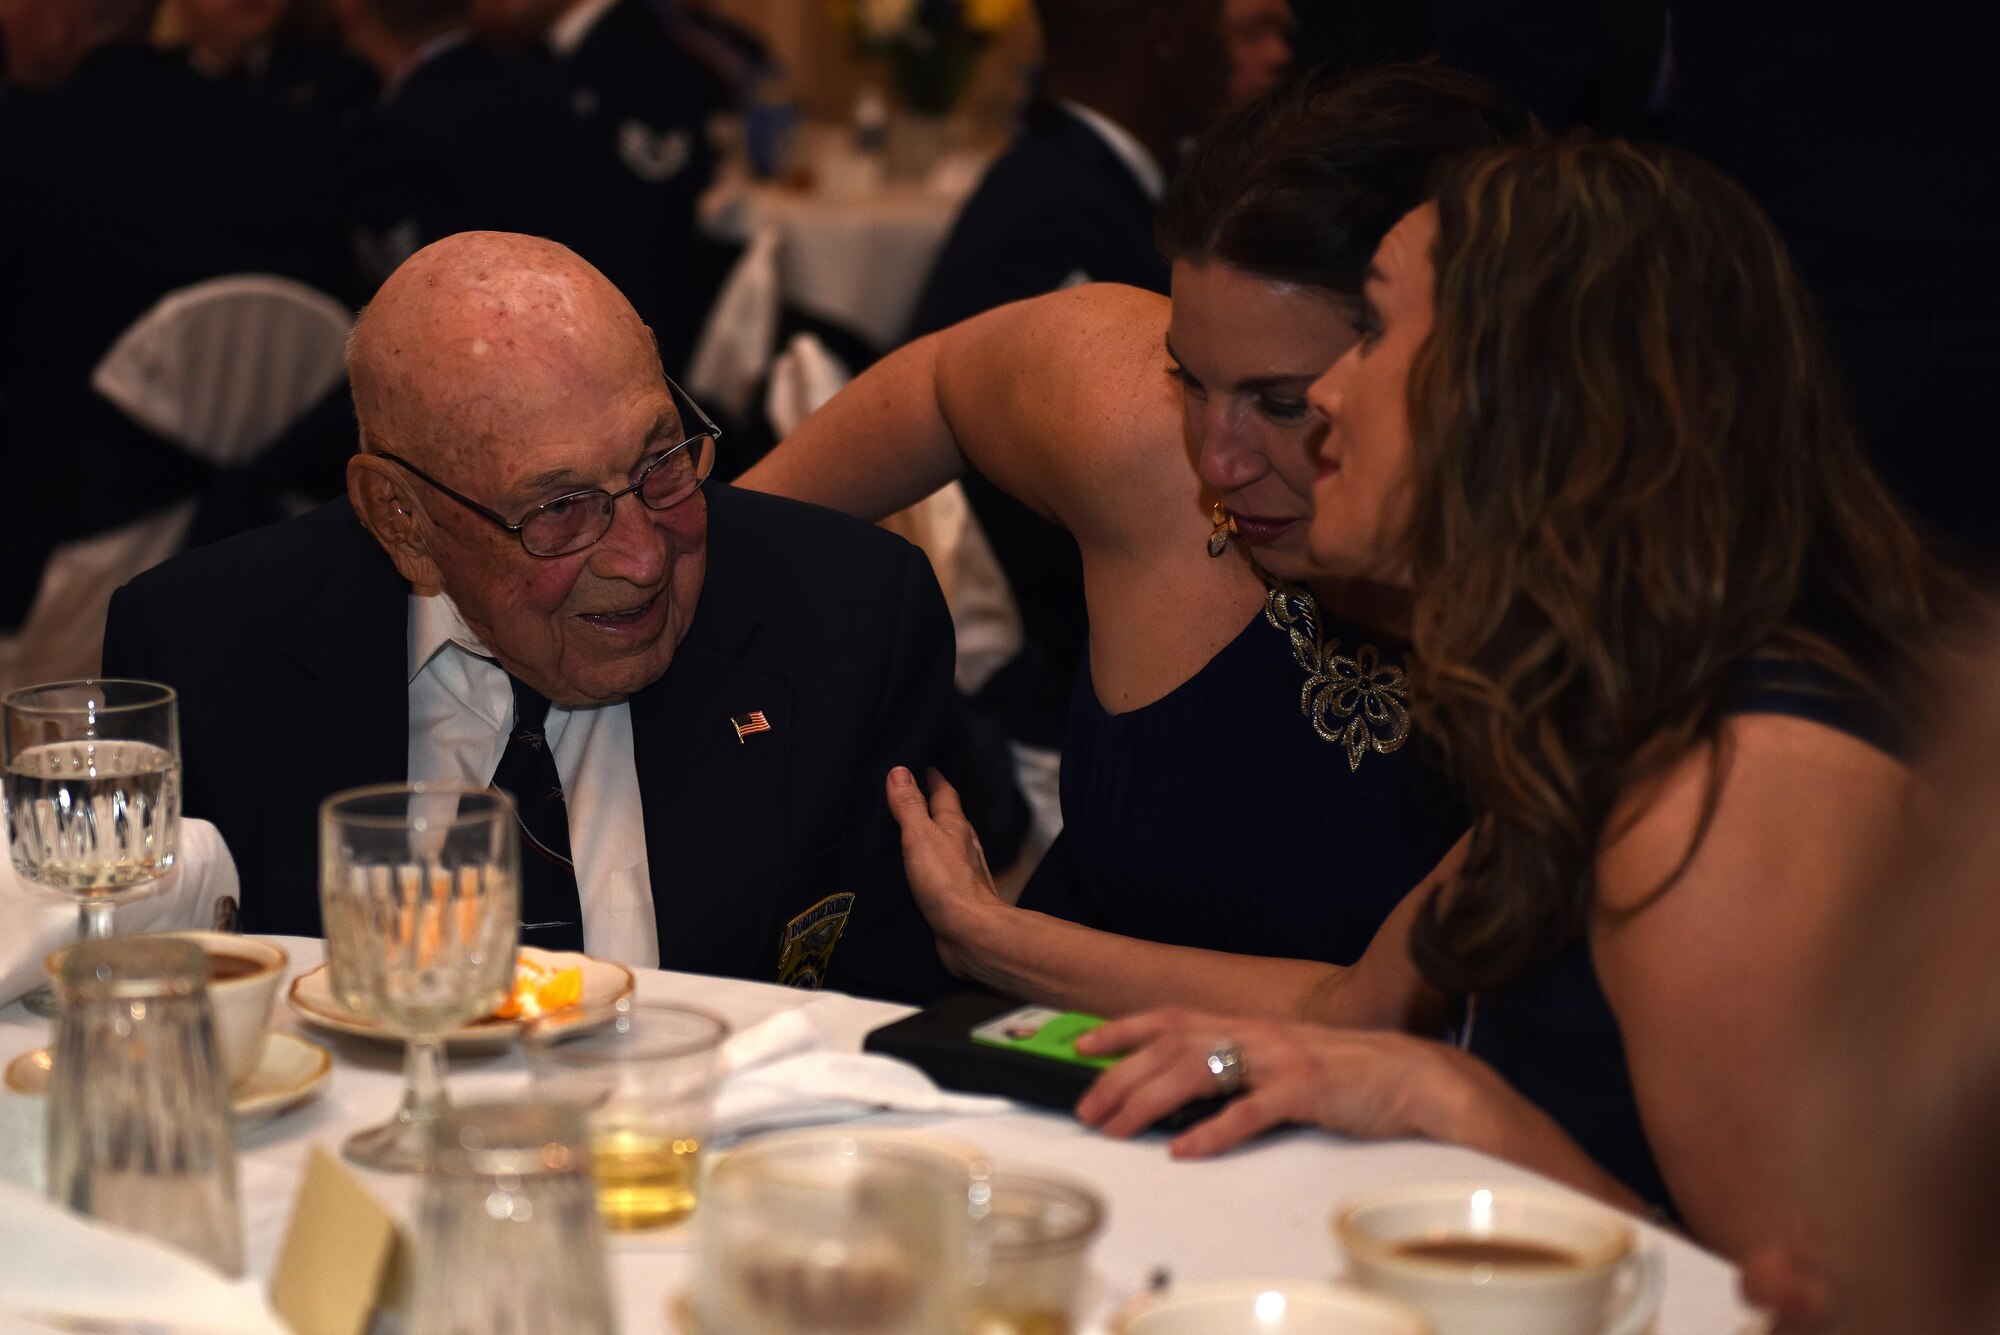 U.S. Air Force Retired Col. Dick Cole speaks to Goodfellow members during the Annual Awards Banquet at the Cactus Hotel in San Angelo, Texas, Feb. 3, 2017. Cole is the last remaining Doolittle Raider. (U.S. Air Force photo by Airman 1st Class Caelynn Ferguson/ Released)